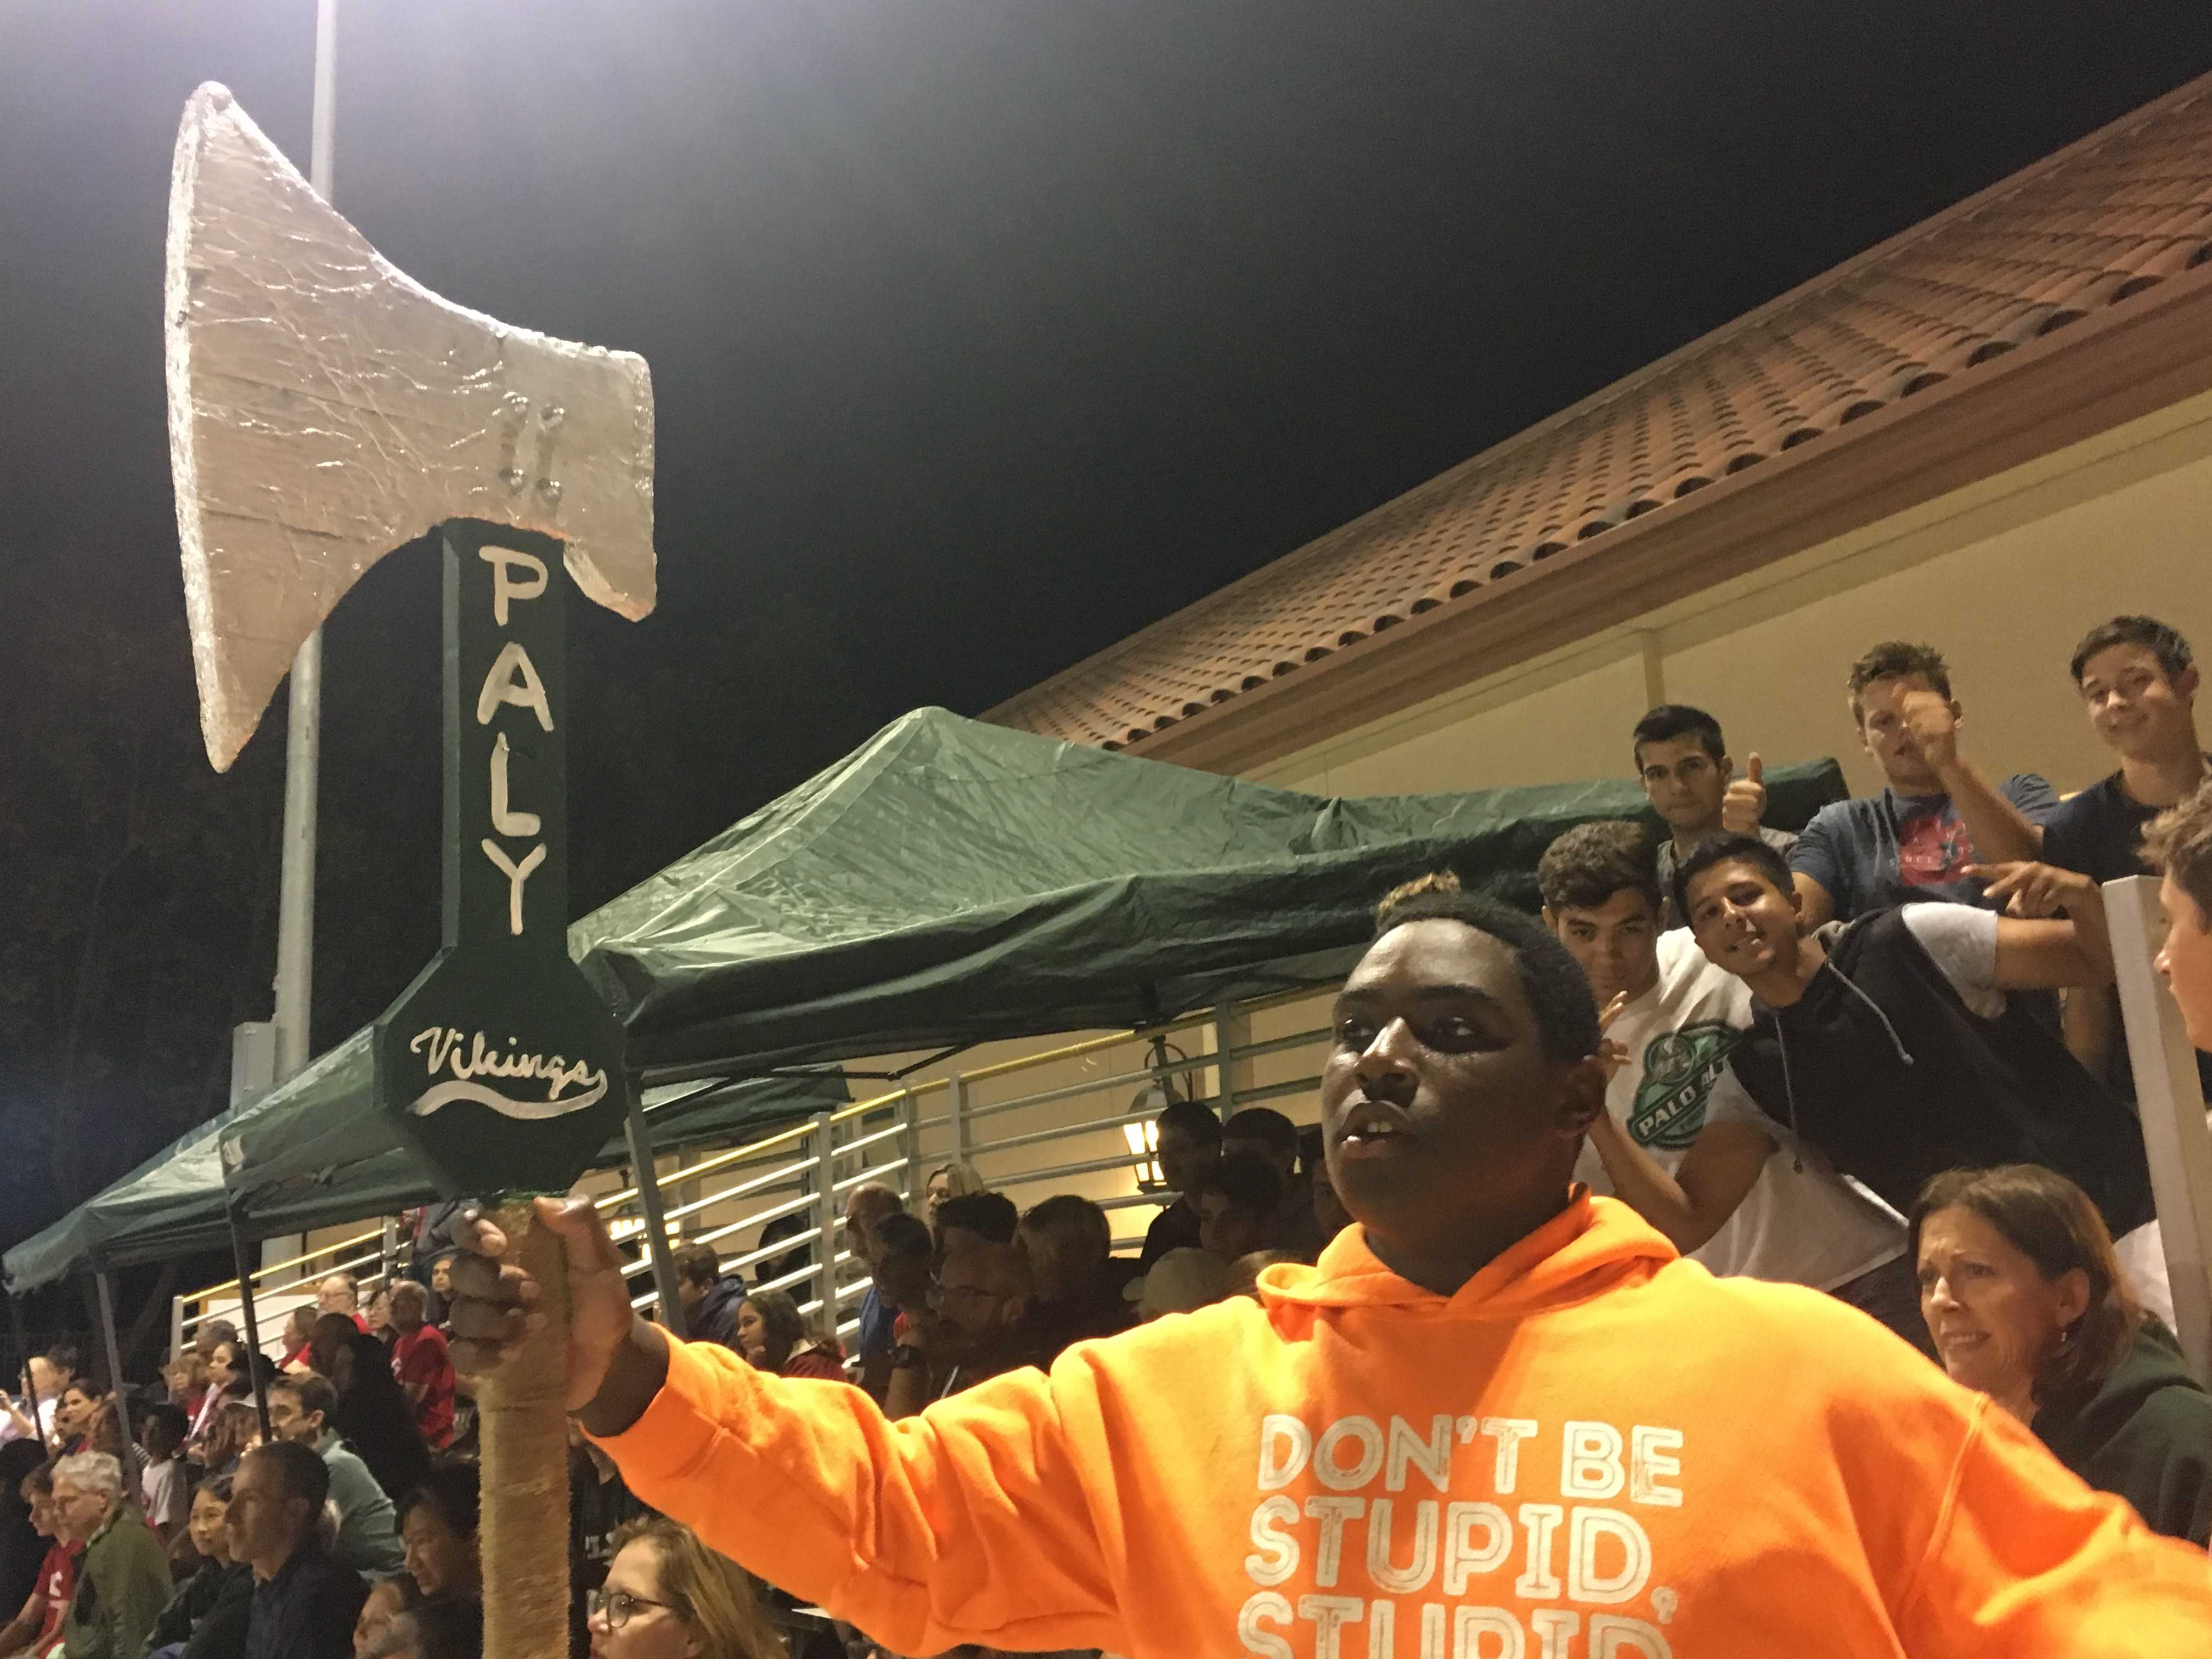 Junior Alex Daw raises an axe to cheer for the team, and other students in the stands support him energetically. Photo: Soumya Jhaveri